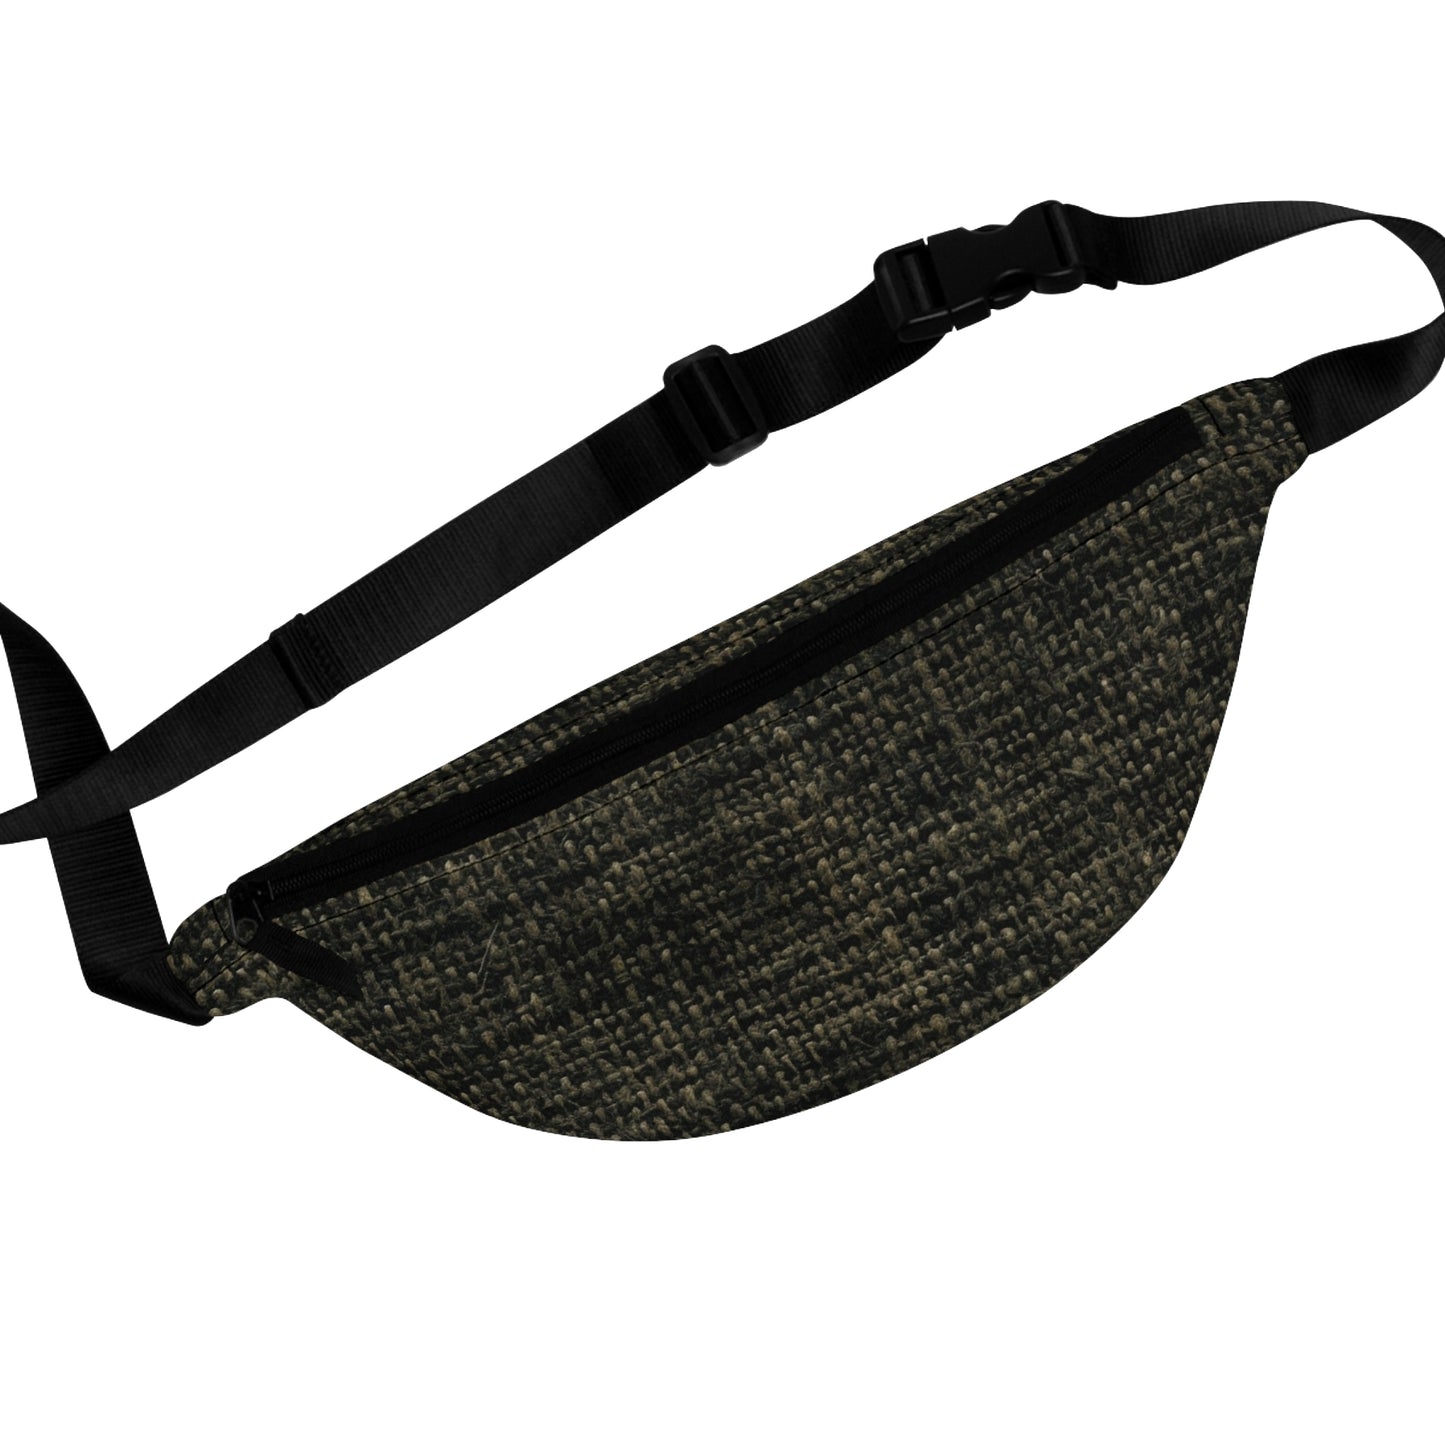 Sophisticated Seamless Texture - Black Denim-Inspired Fabric - Fanny Pack